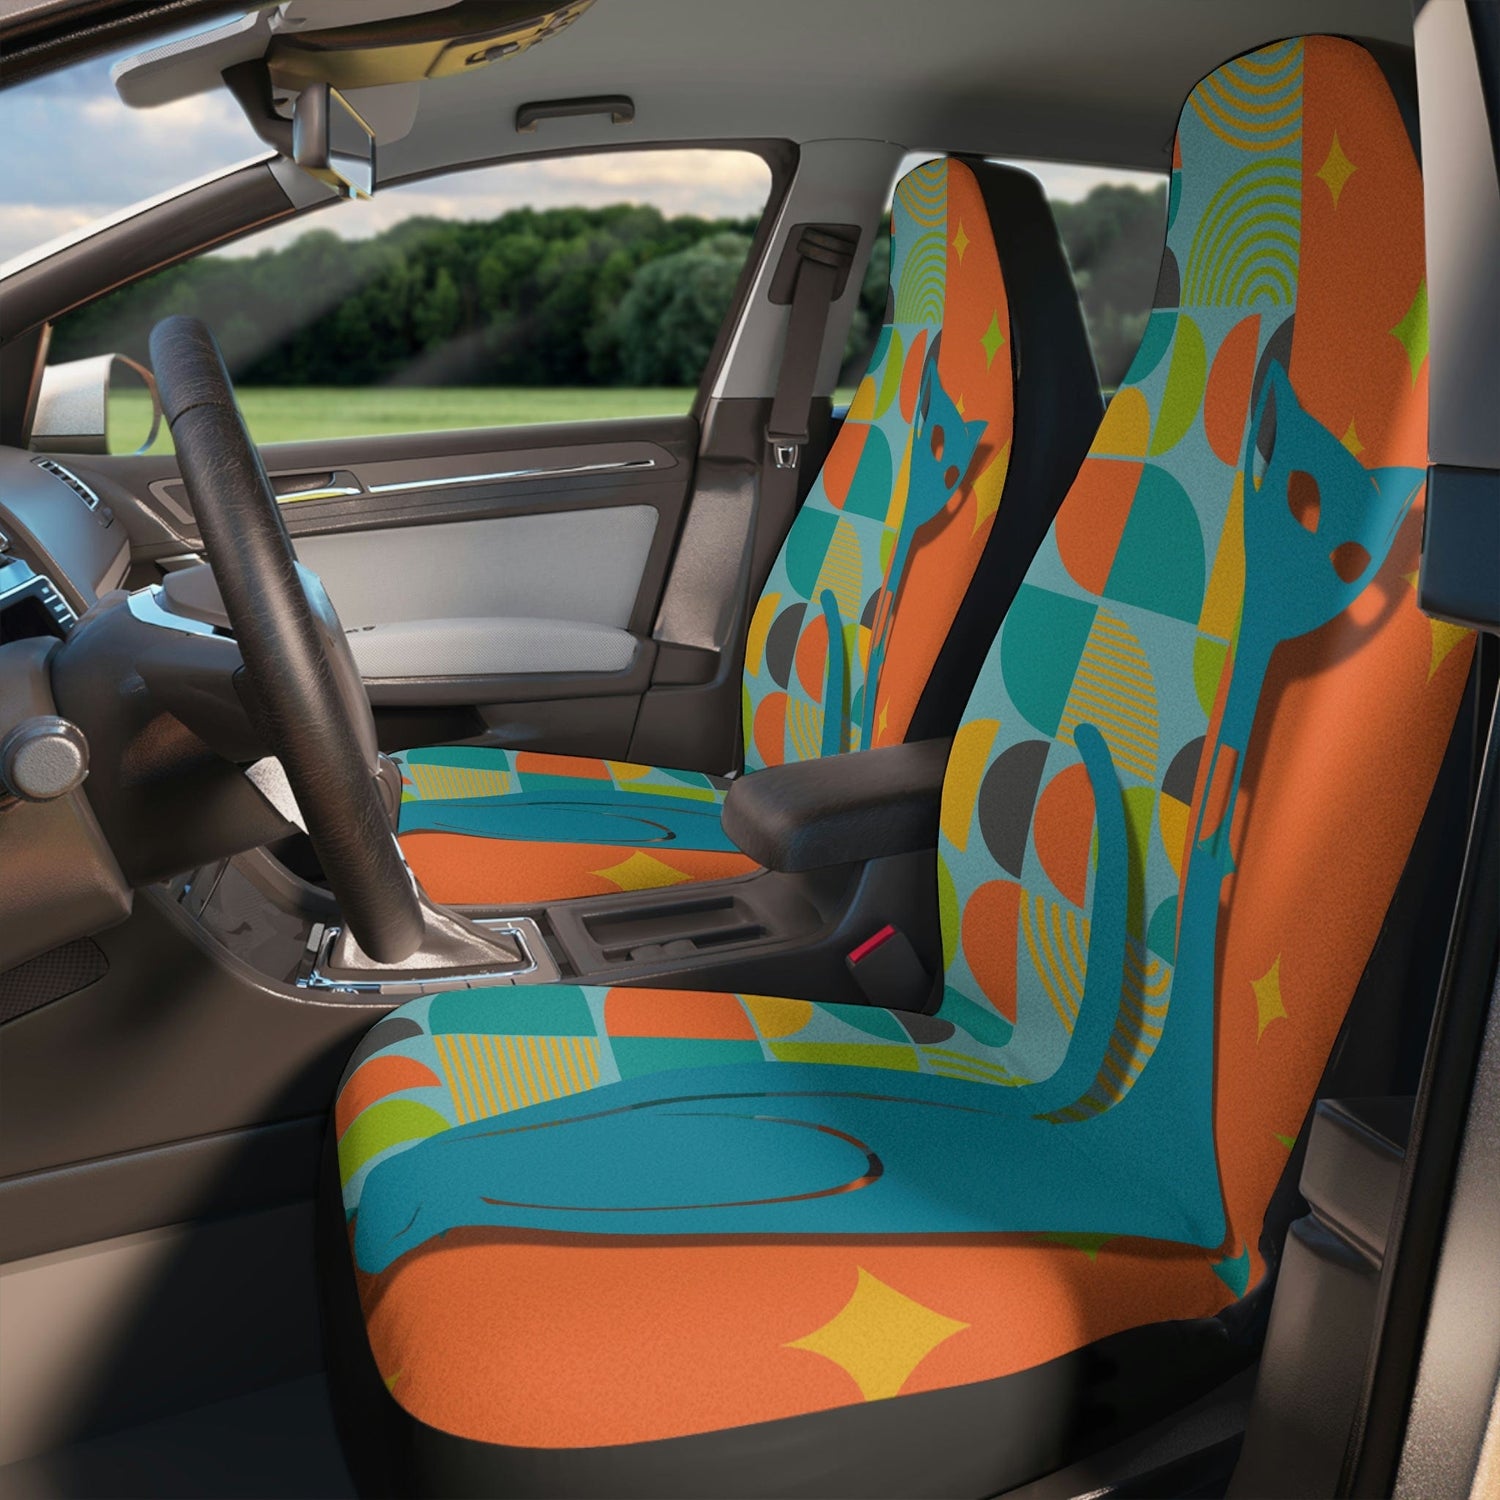 Atomic Cat, Mid Century Modern, Orange, Teal, Starburst, Retro, Fun, Bold, Beautiful Hipster Mod Car Seat Covers All Over Prints 48.03&quot; × 18.50&quot; / Black